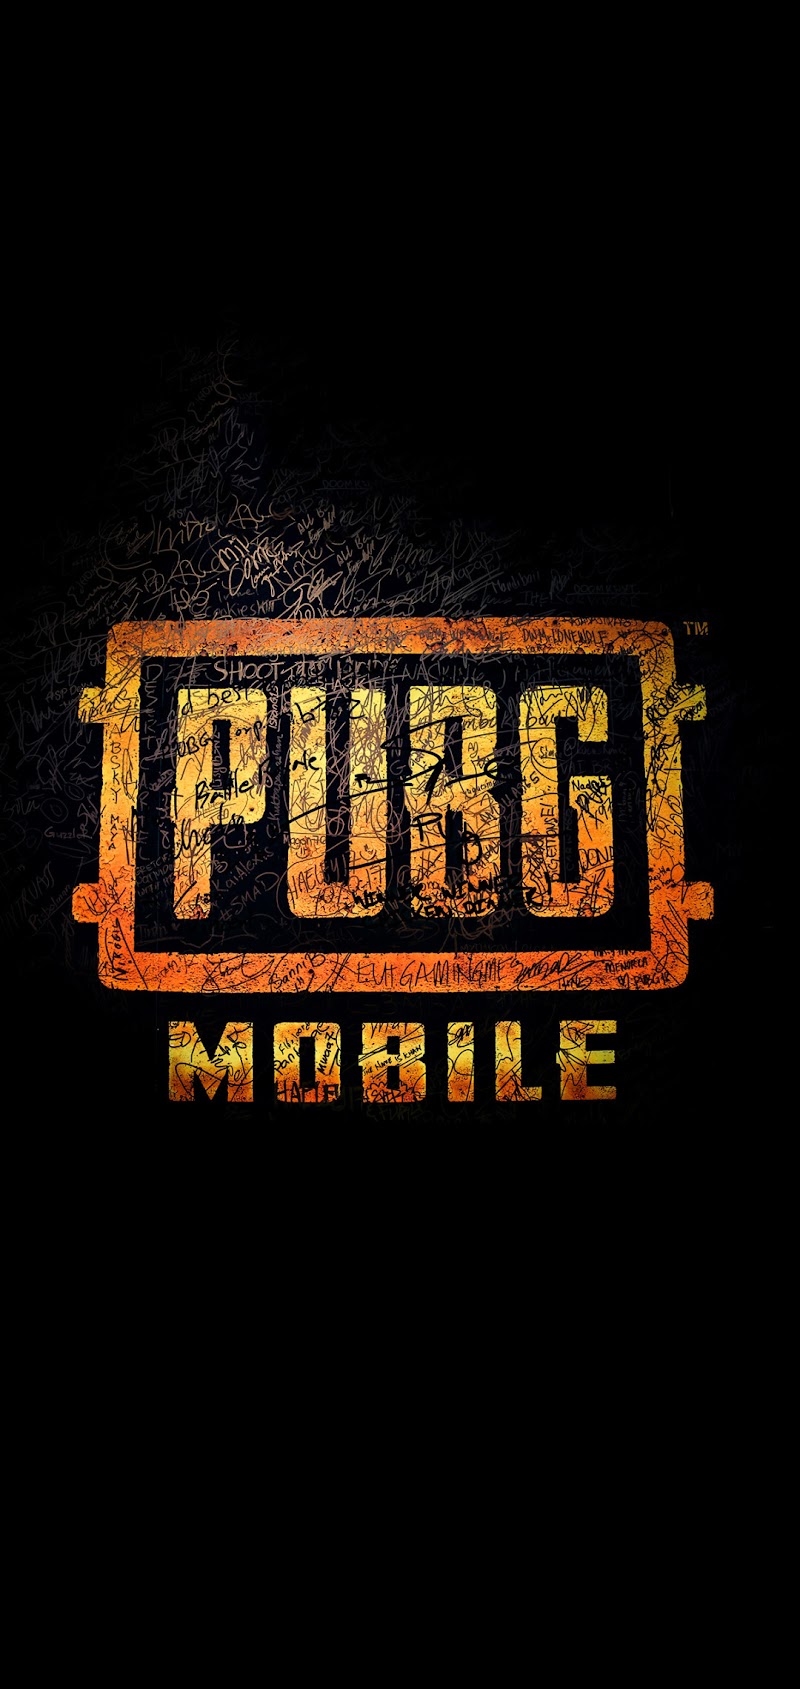 PUBG MOBILE updated version 1.0 download apk +obb for Android and iOS 100% secure